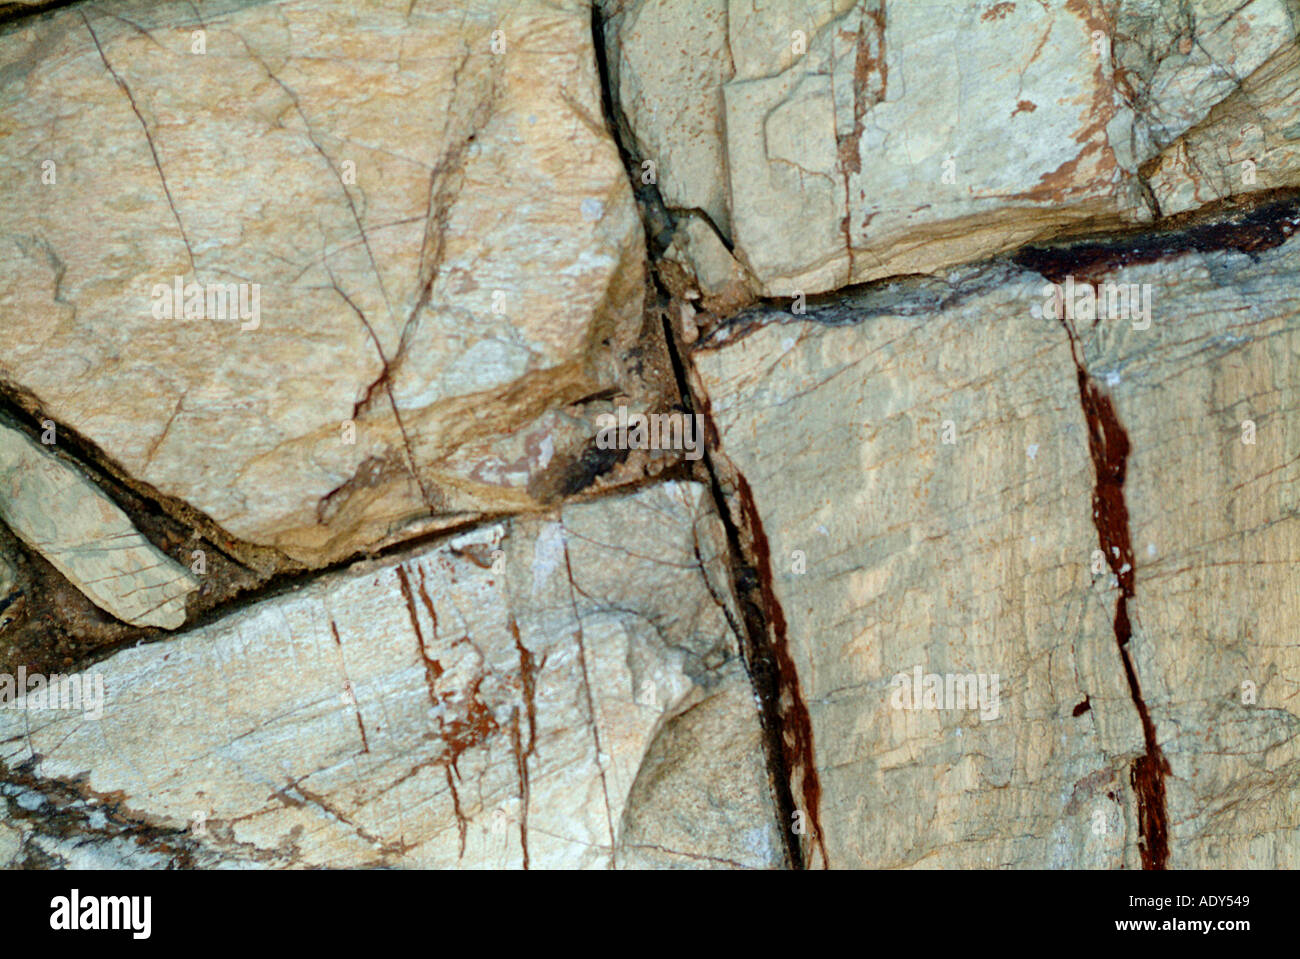 Backgrounds II ock rocks cracks grooves groove fitting together stones stone miscellaneous background texture Stock Photo